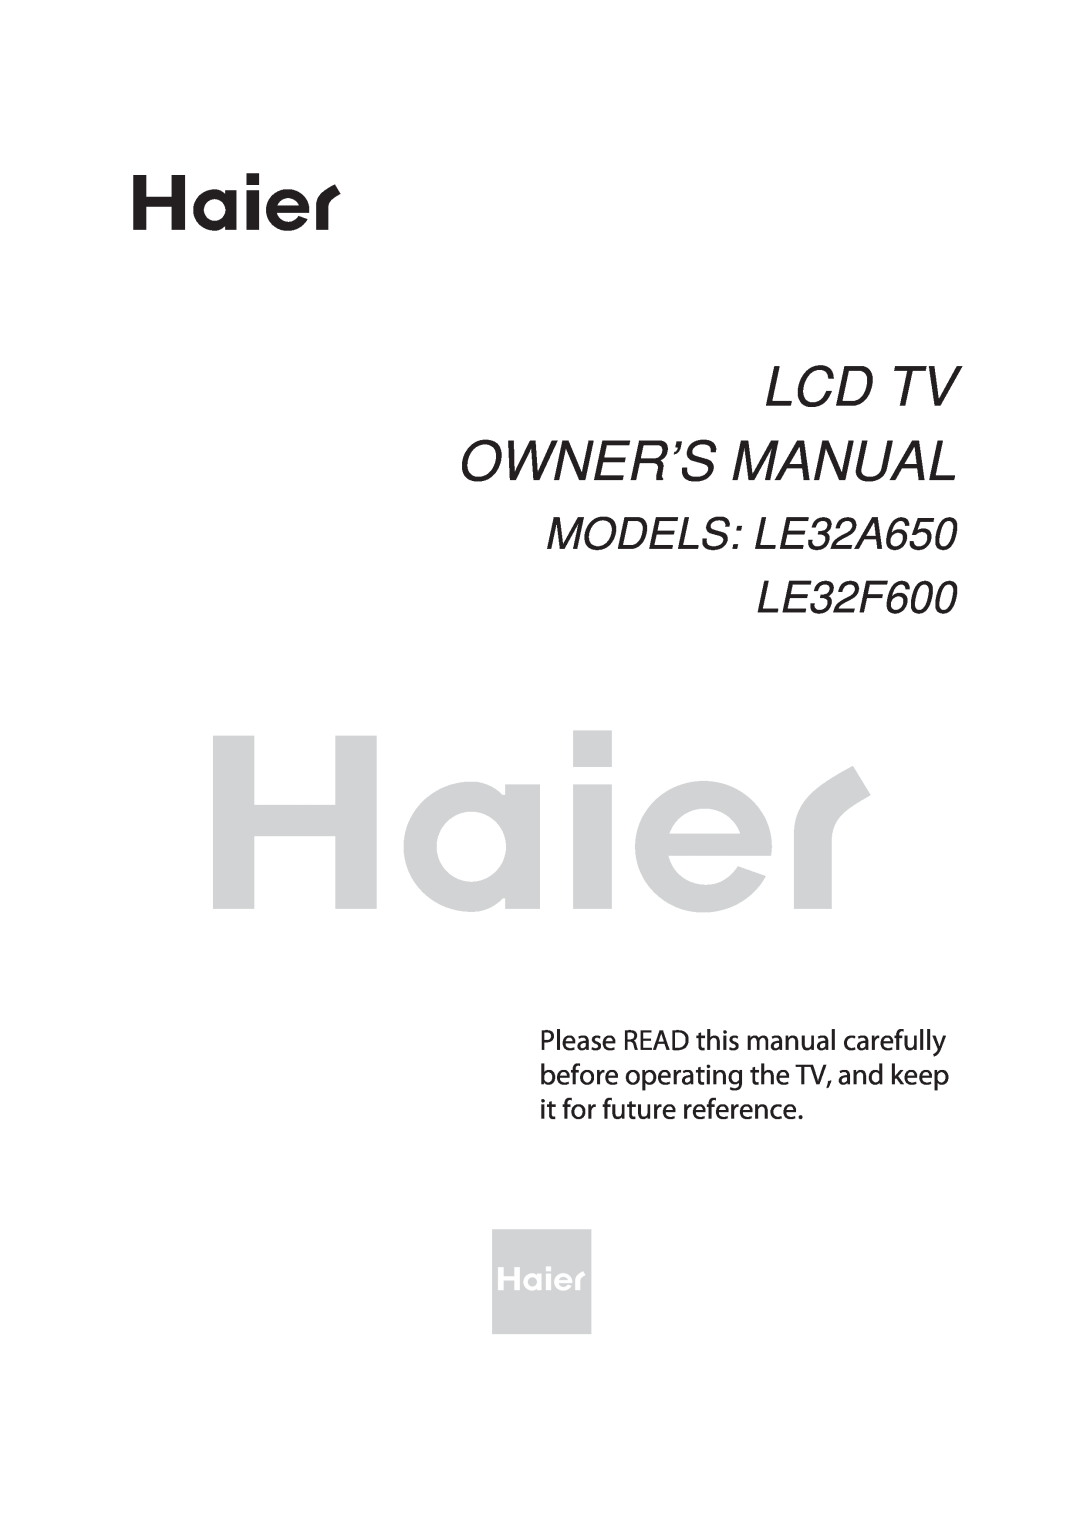 Haier owner manual Lcd Tv Owner’S Manual, MODELS LE32A650 LE32F600 